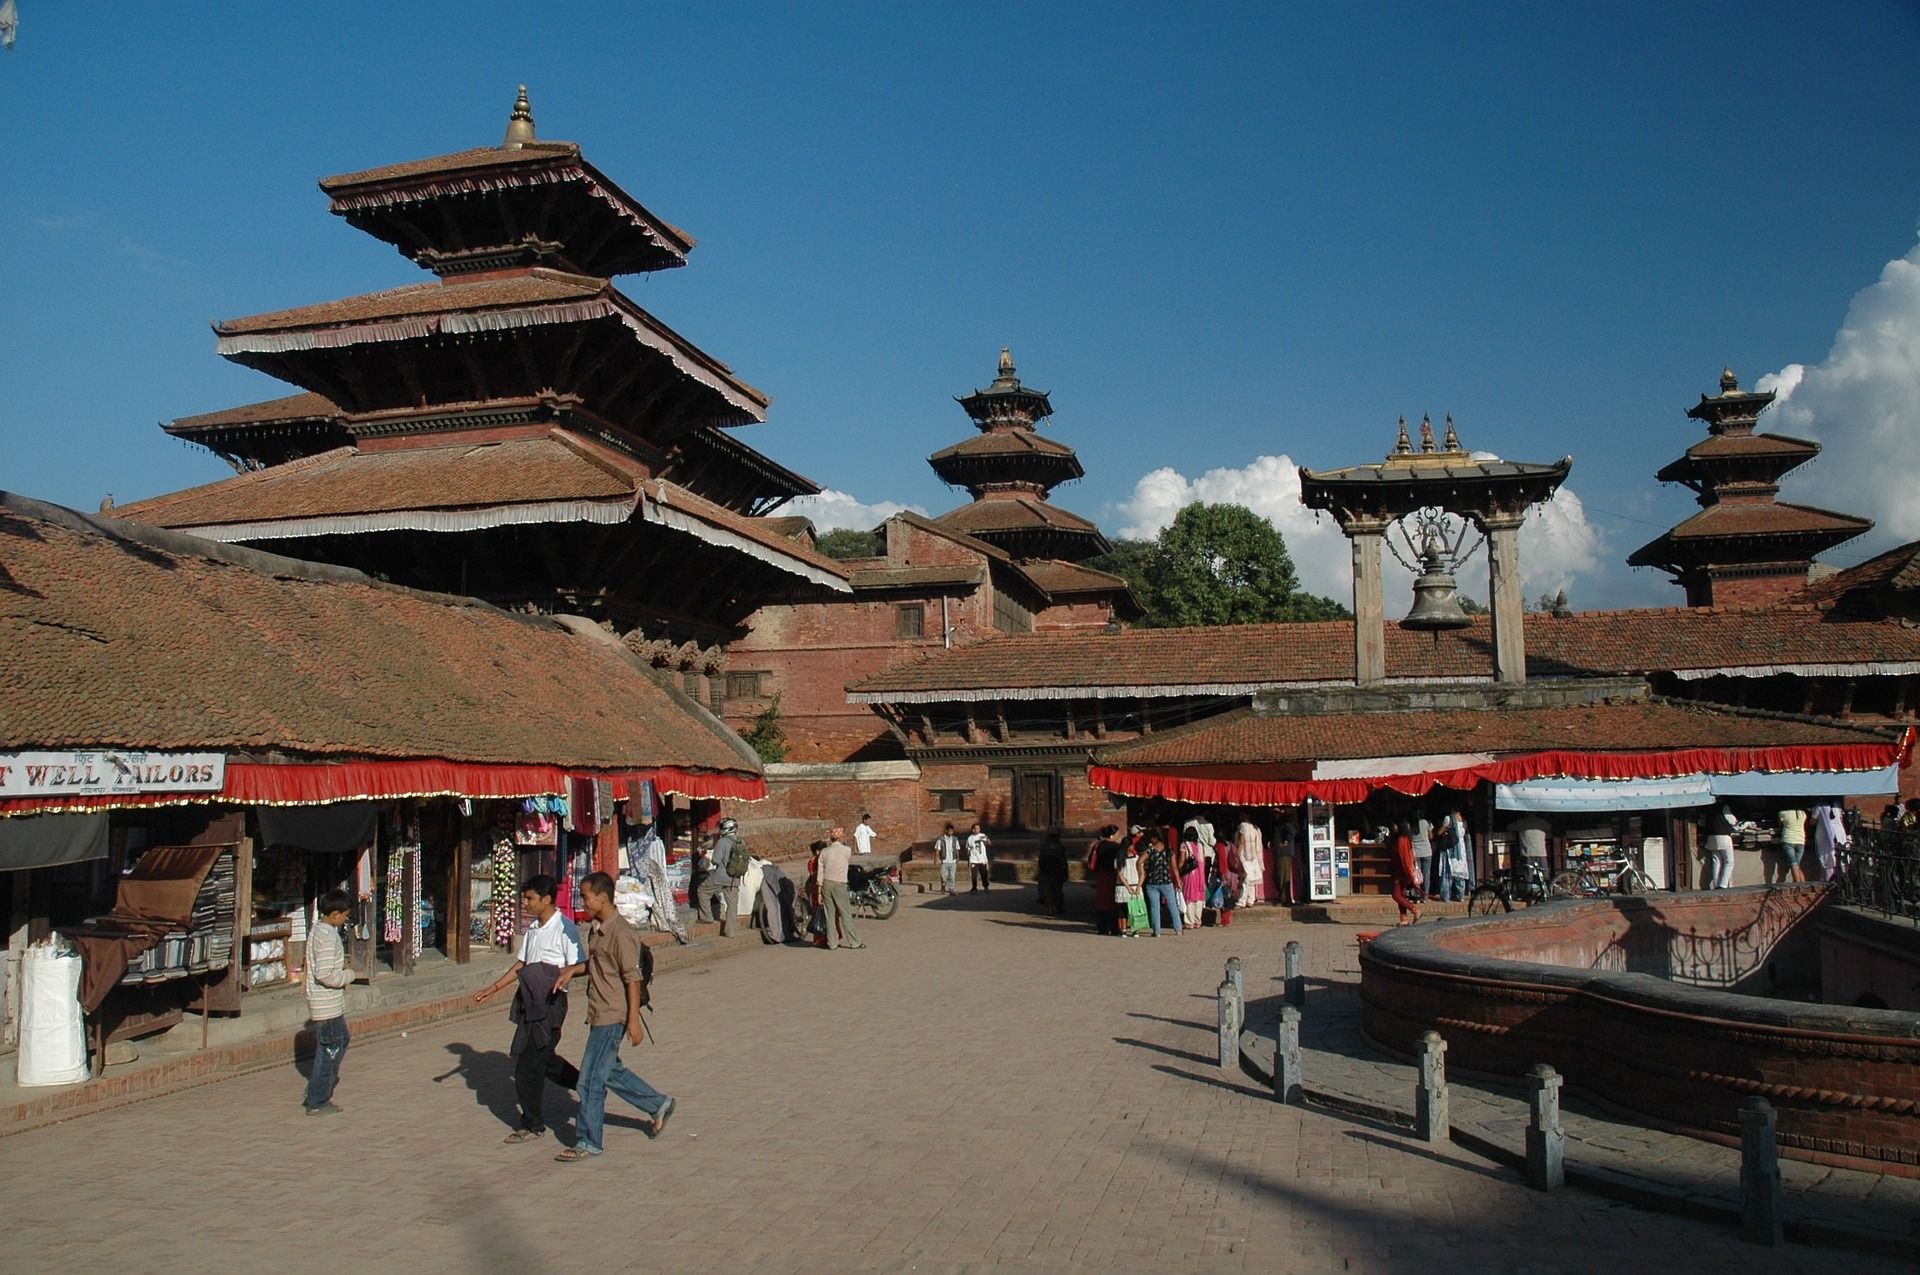 Nepal travel tips to visit the country safely